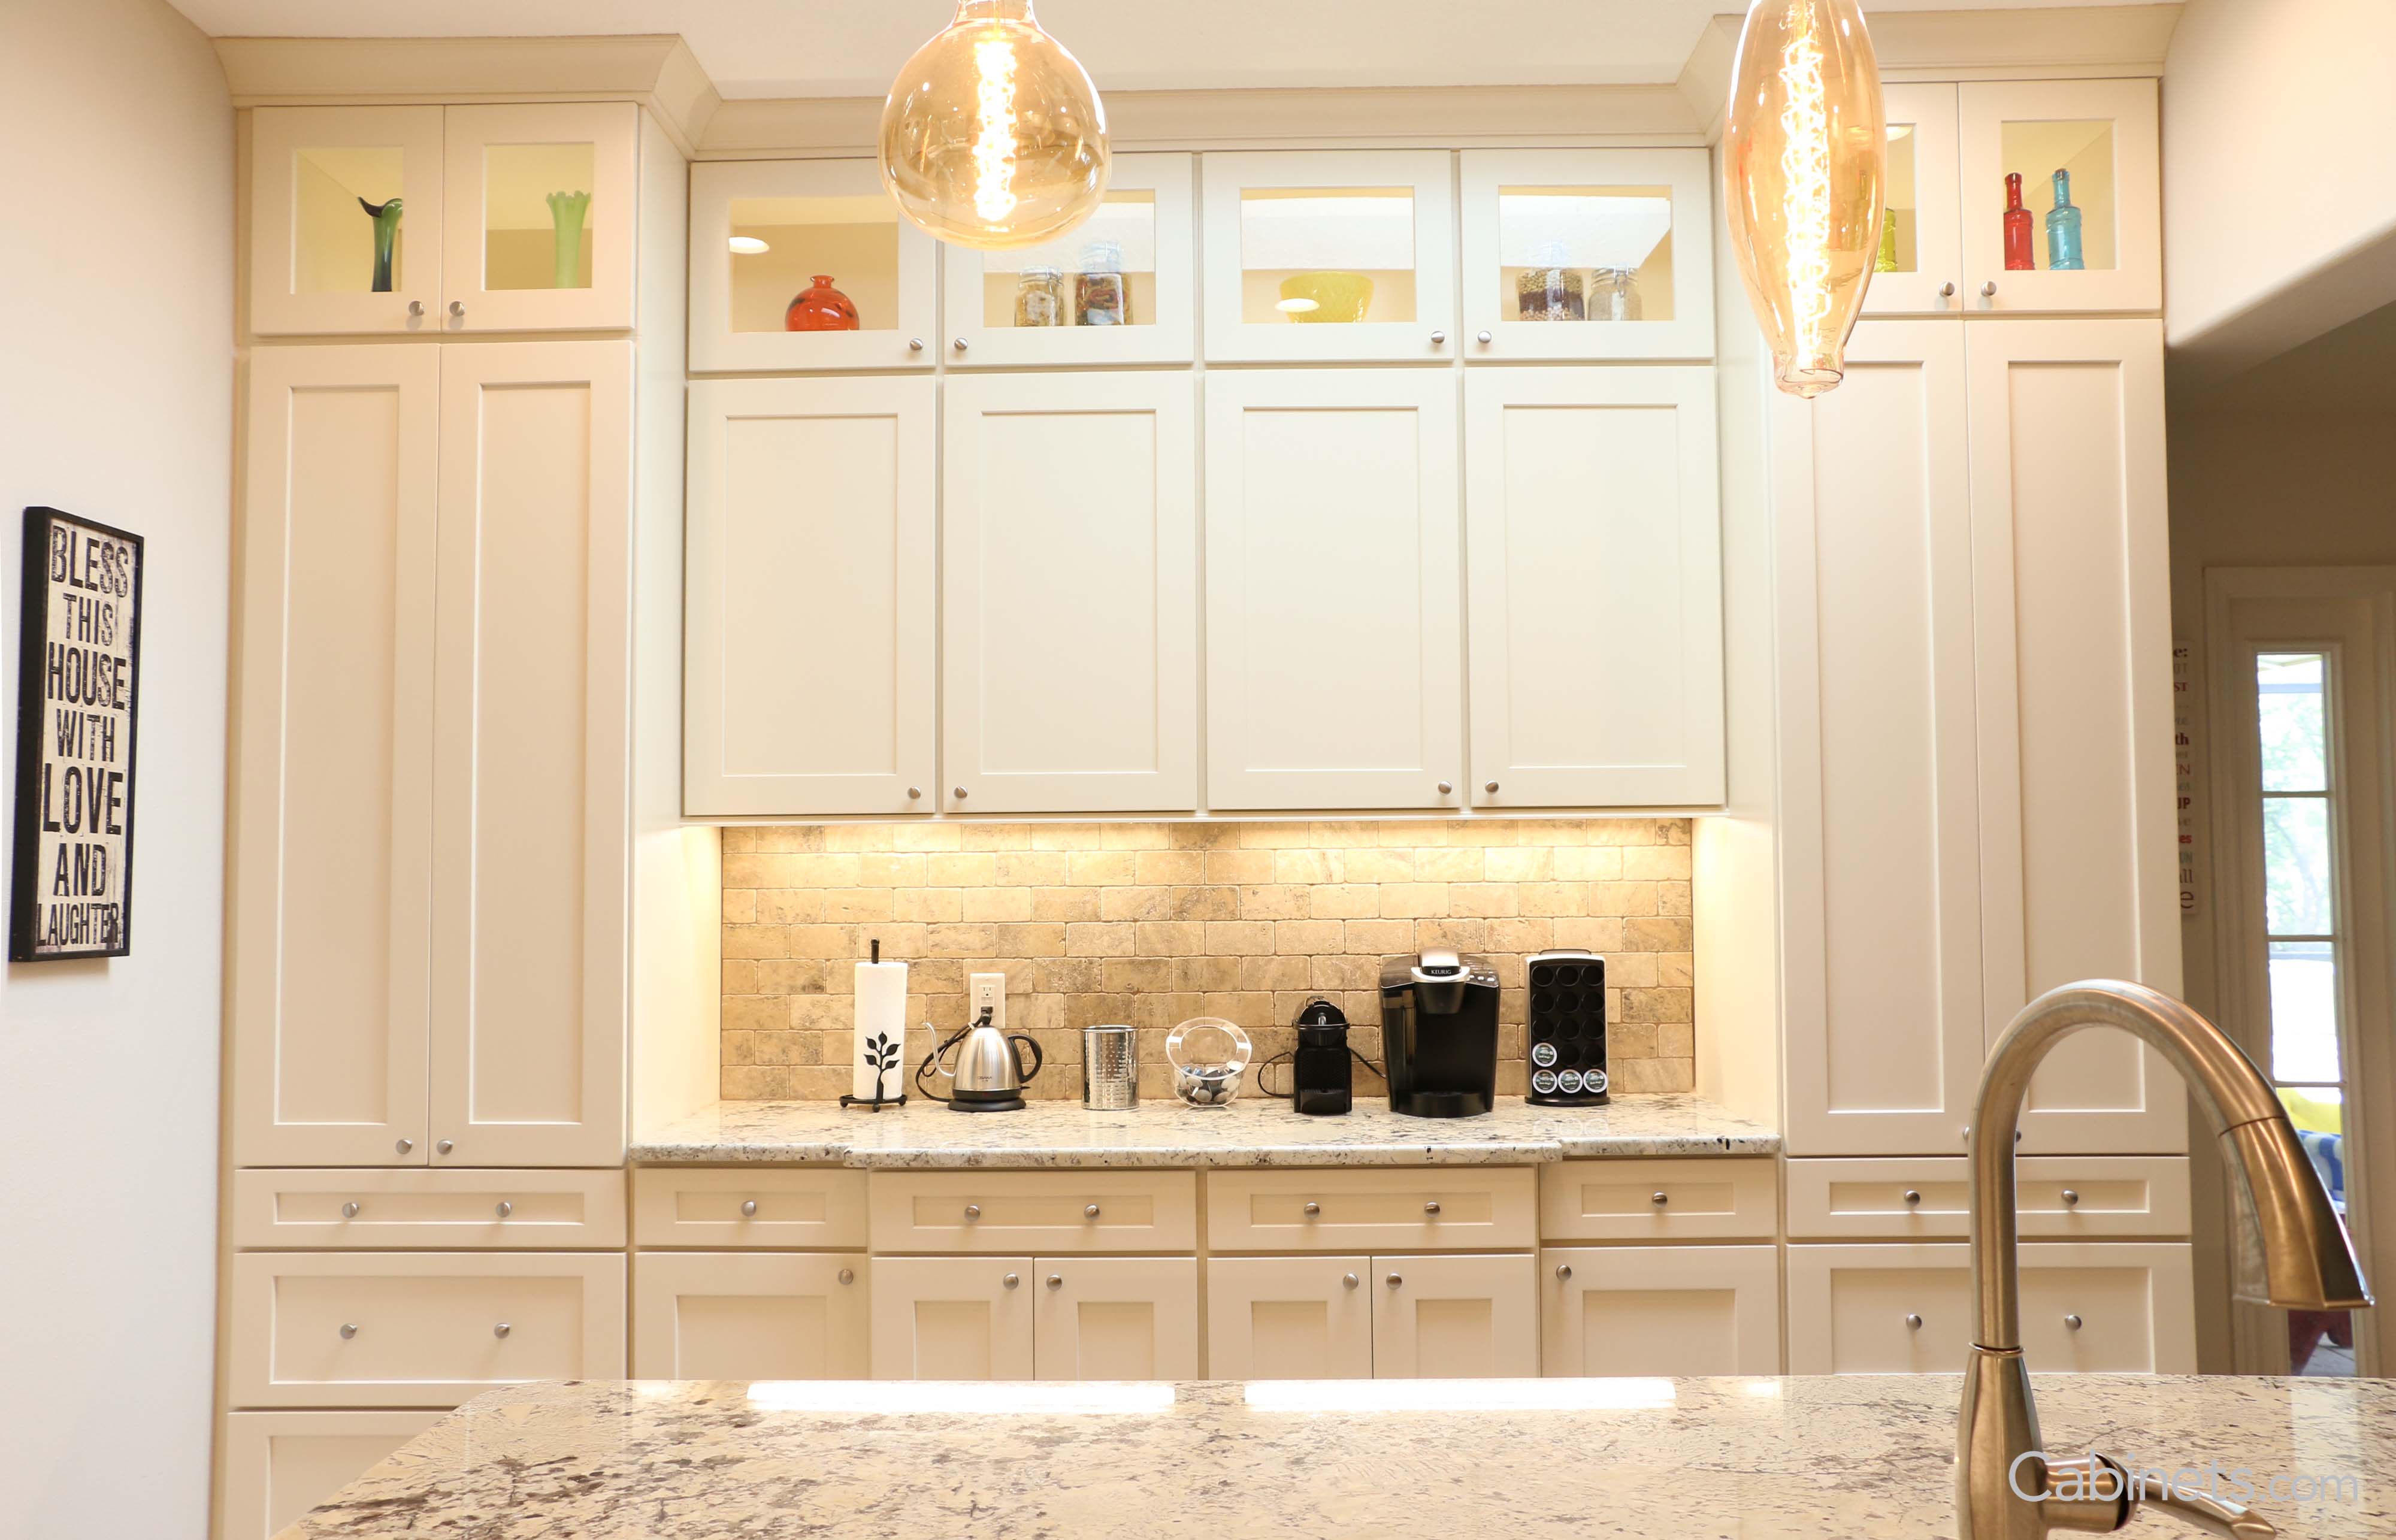 7 Questions Before Any Kitchen Remodel